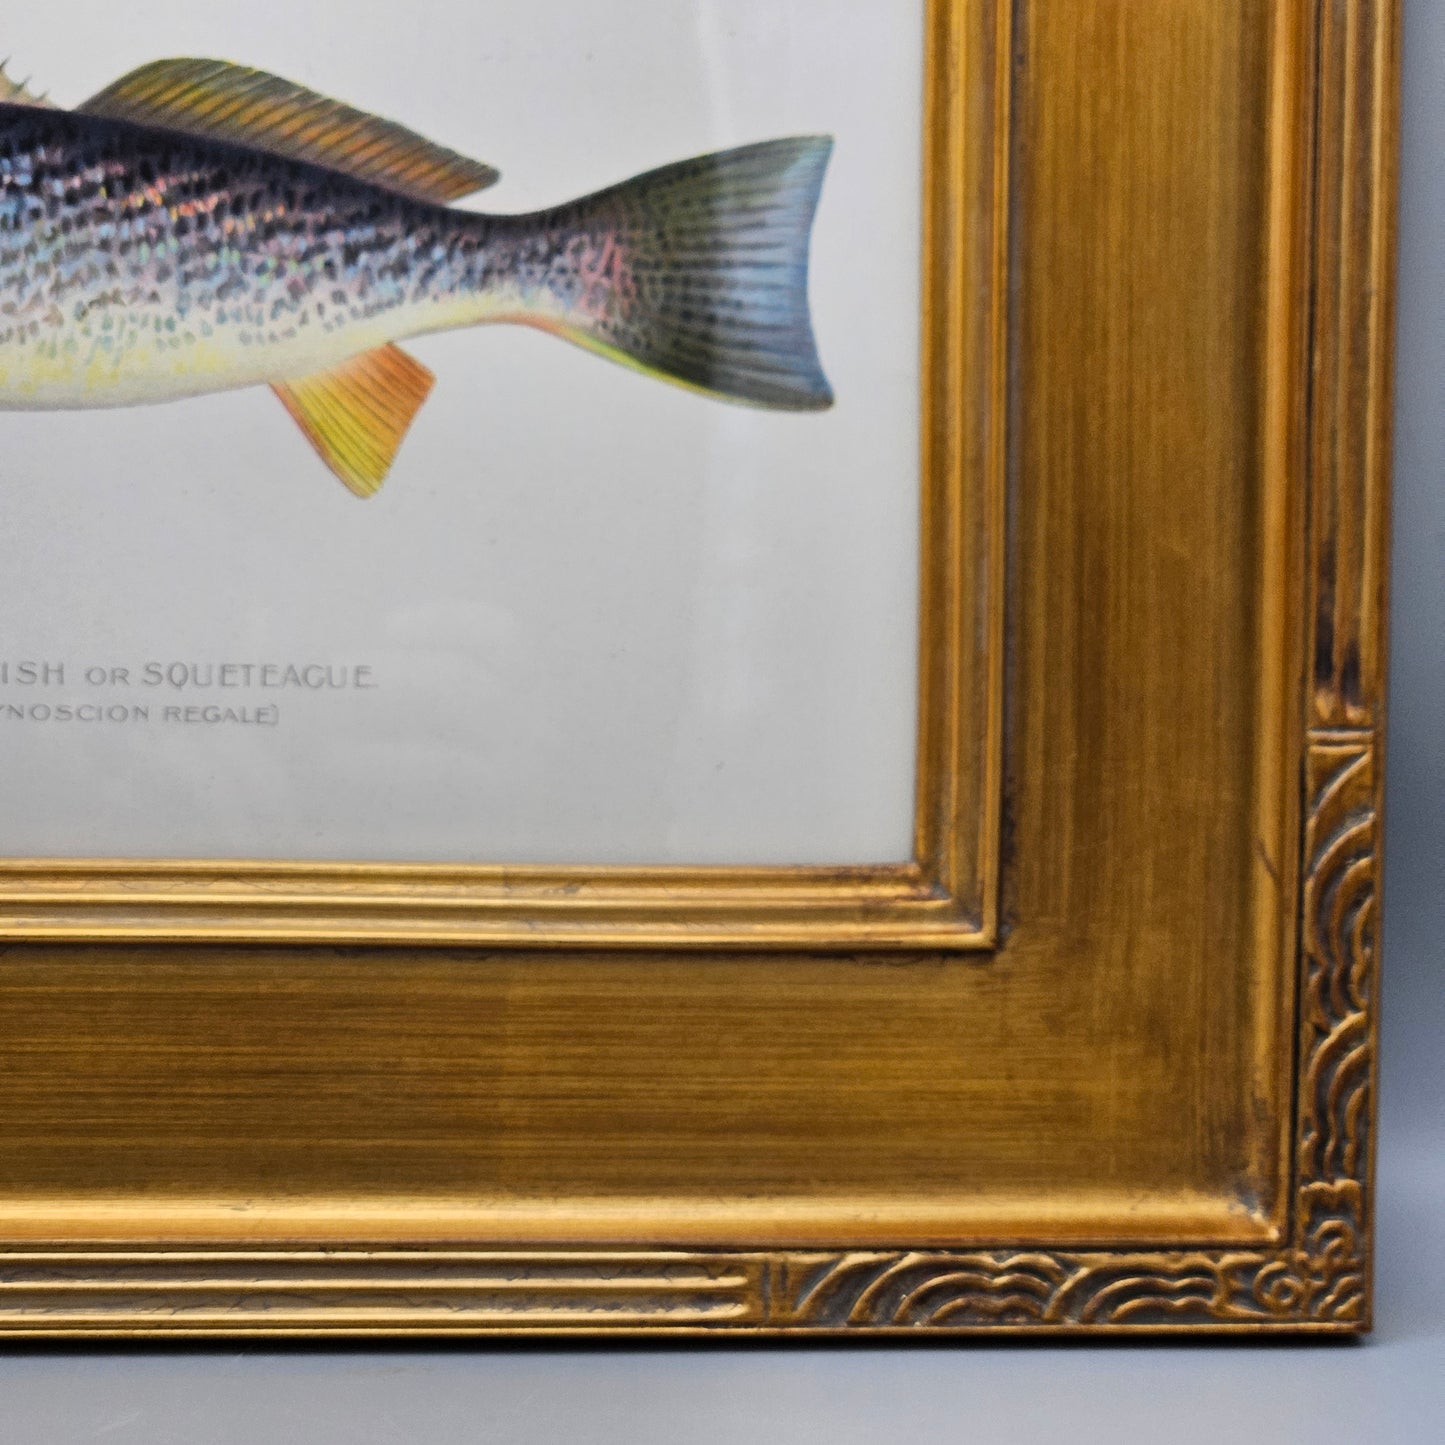 Antique Weak-Fish or Squeteague Framed Fish Hand Colored Lithograph